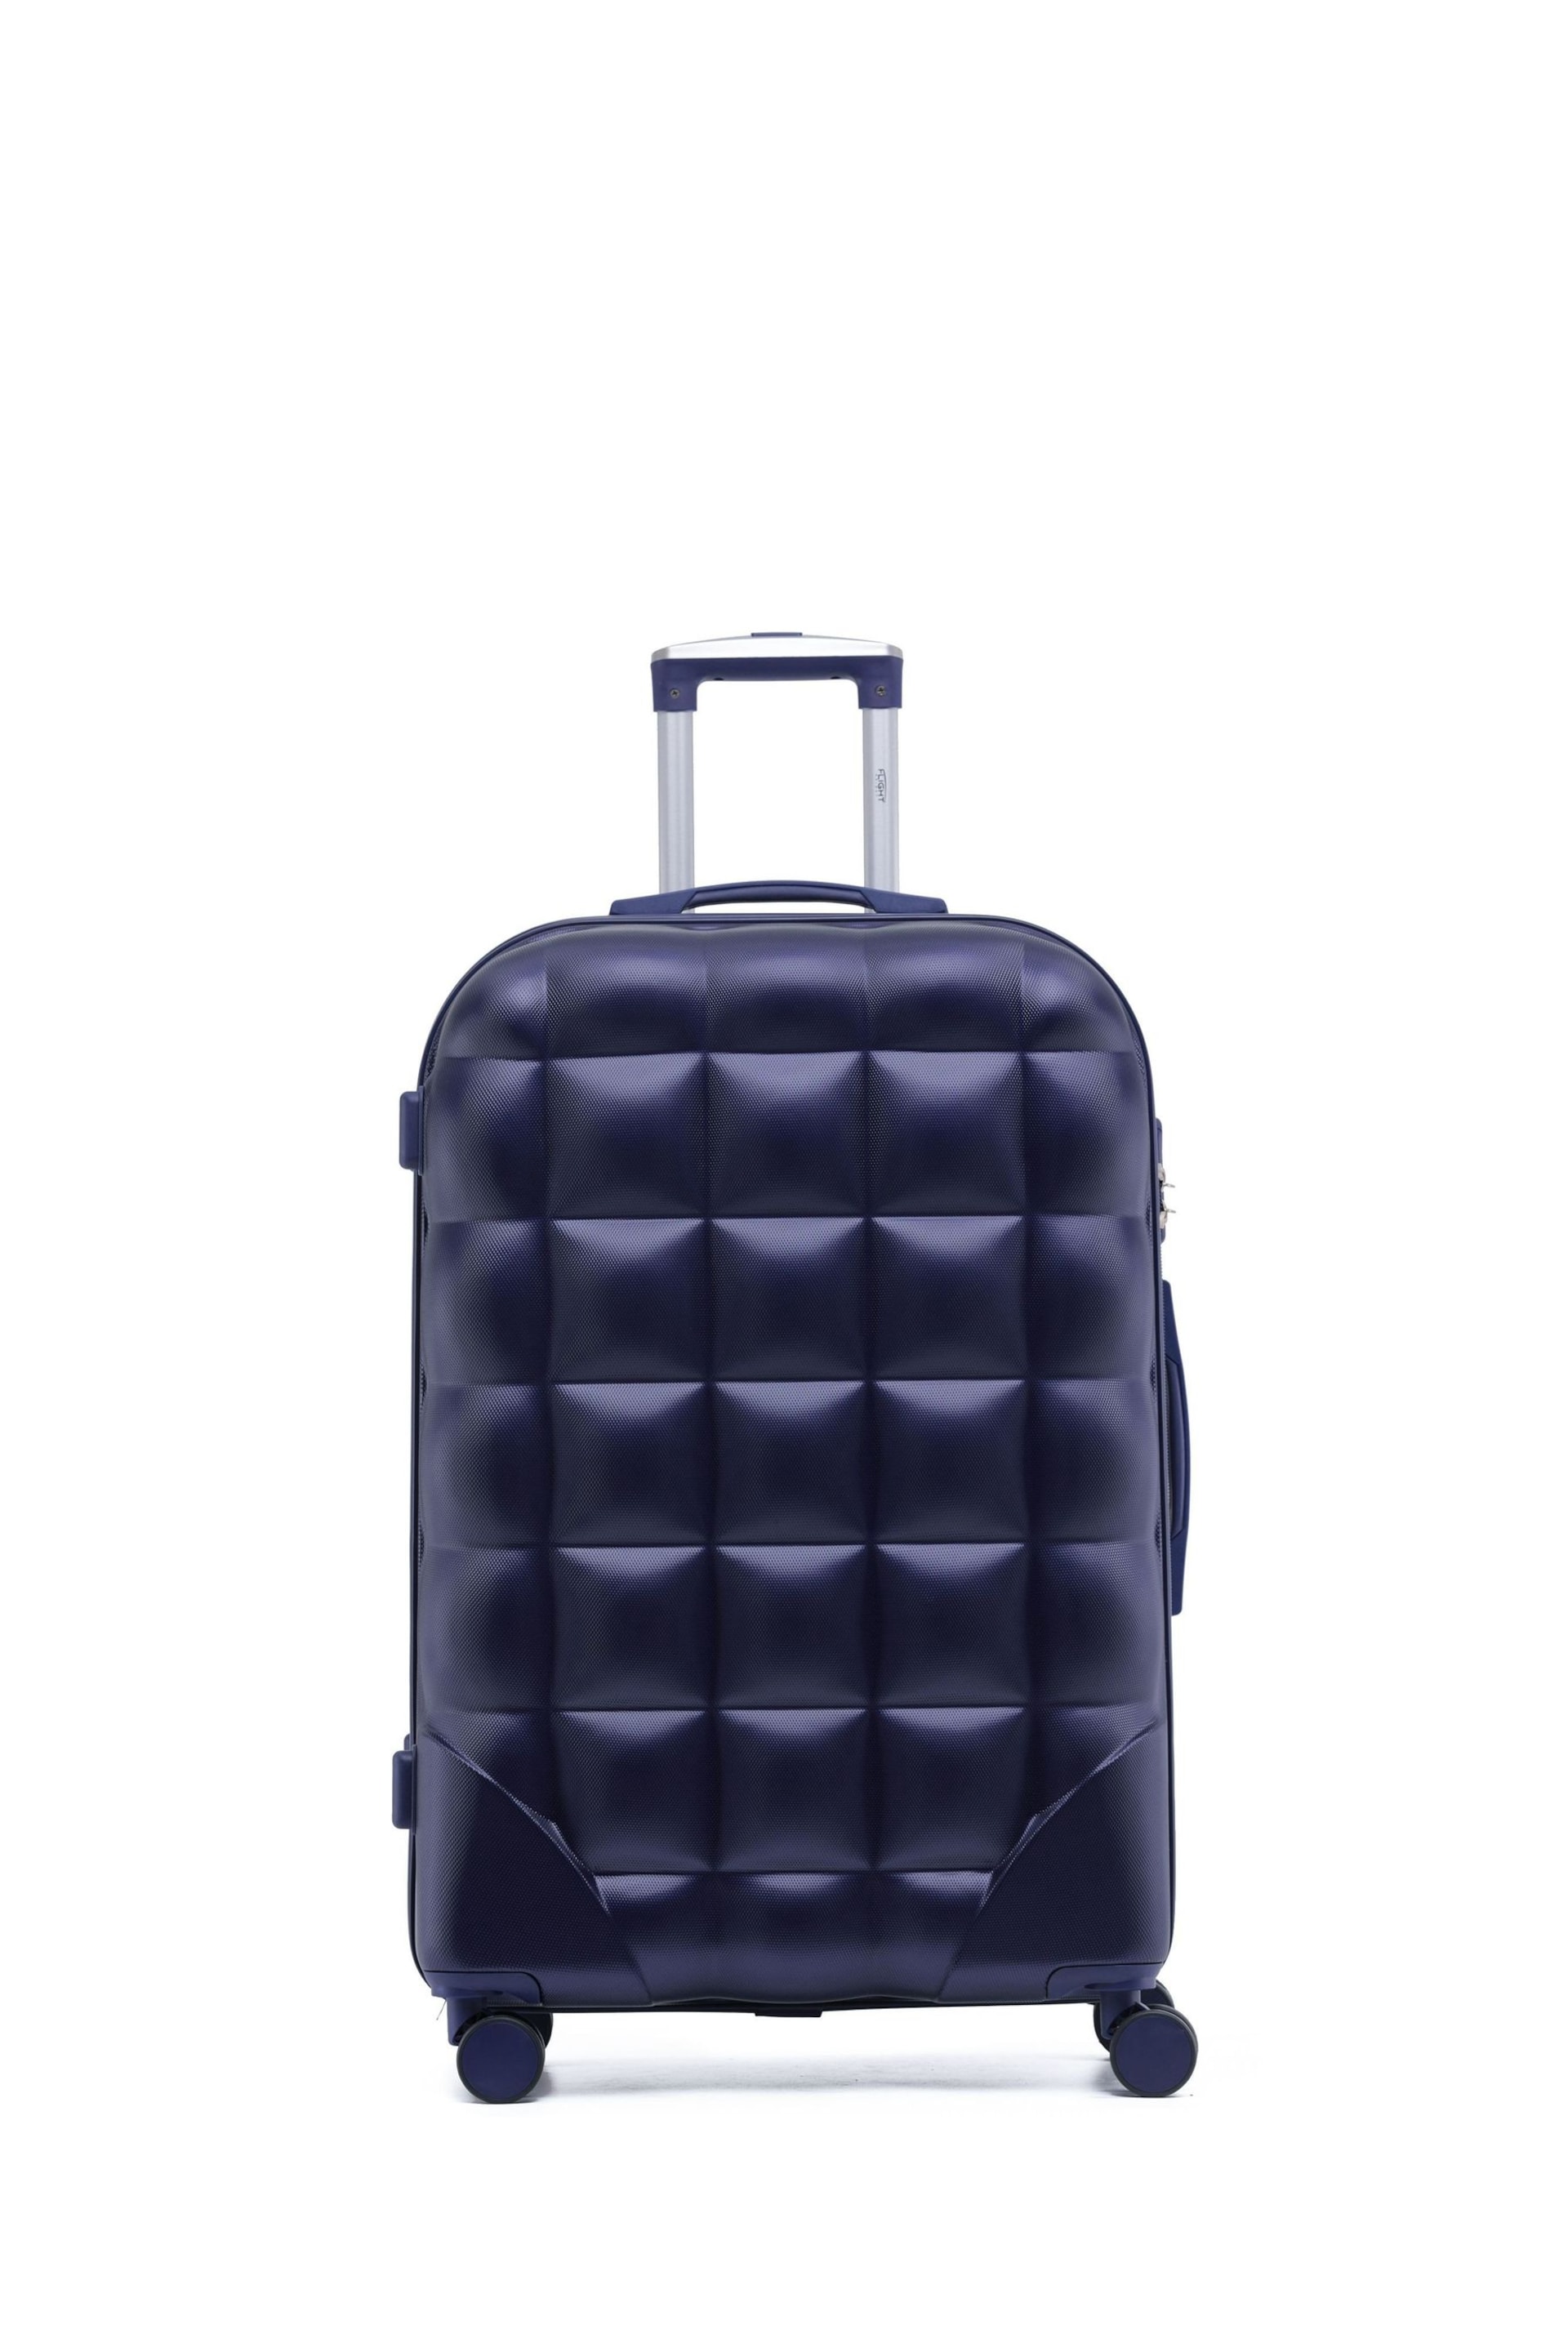 Flight Knight Large Hardcase Printed Lightweight Check In Suitcase With 4 Wheels - Image 1 of 1